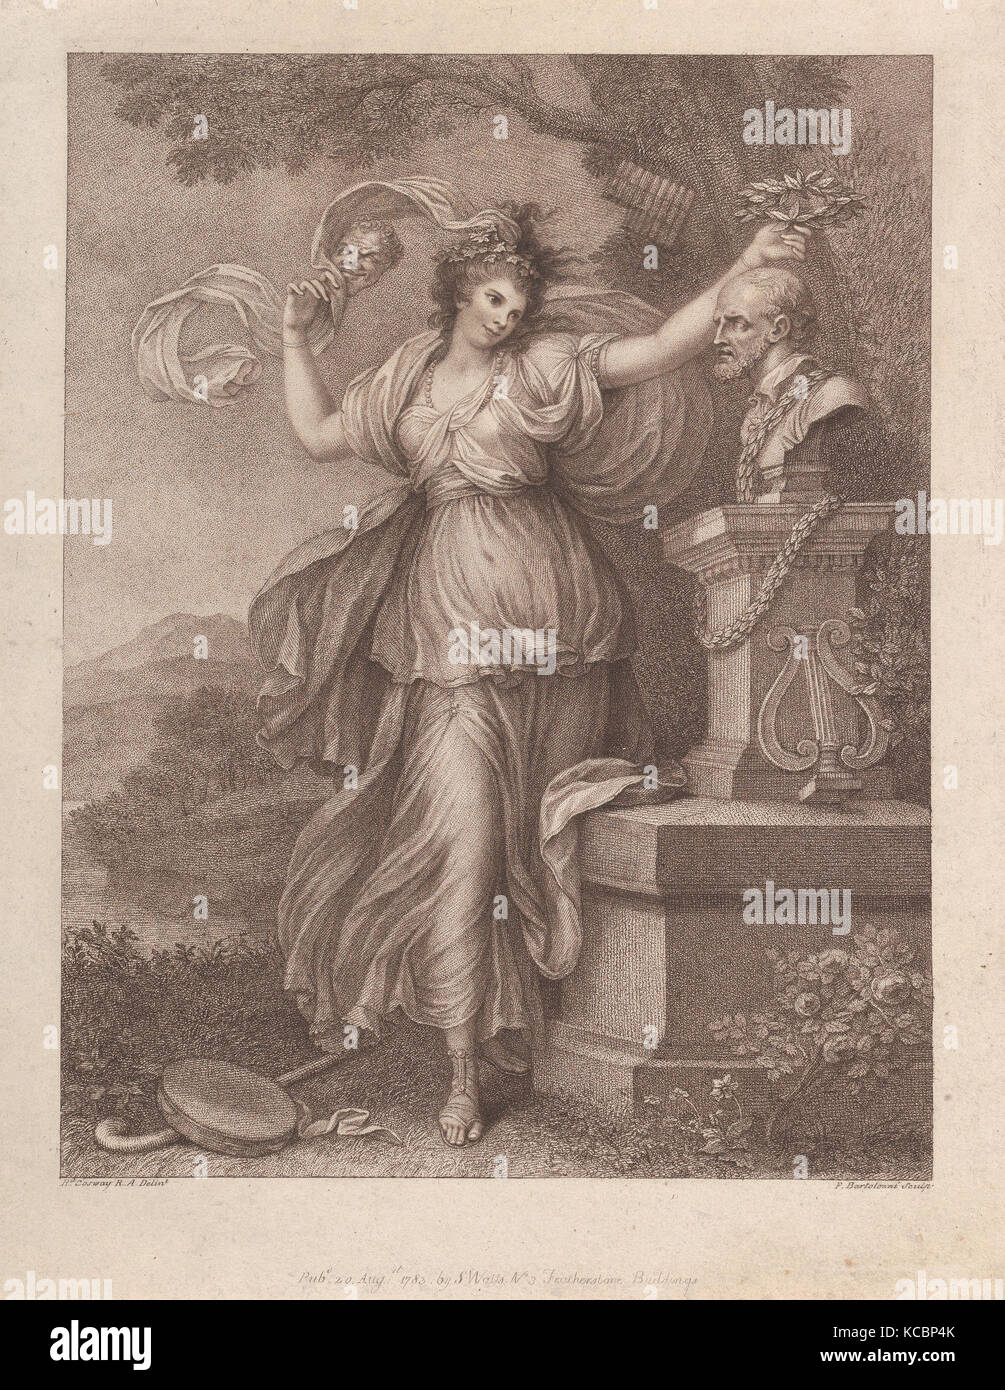 Mrs. Abington as Thalia, After Richard Cosway, August 20, 1783 Stock Photo